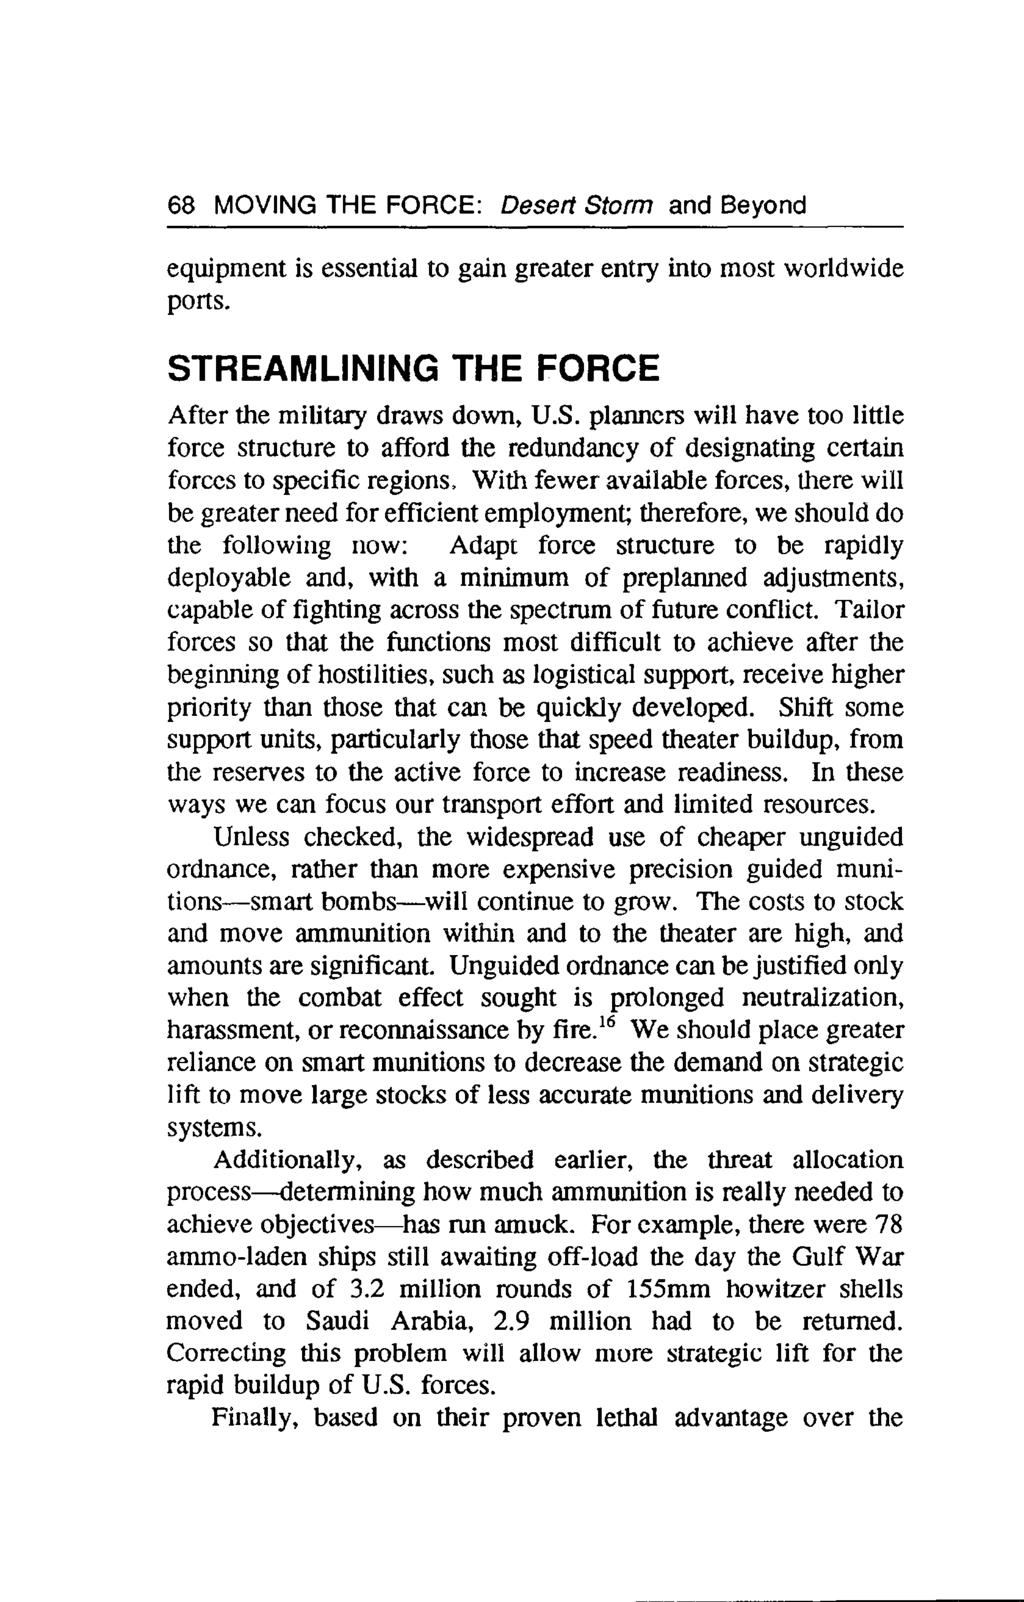 68 MOVING THE FORCE: Desert Storm and Beyond equipment is essential to gain greater entry into most worldwide ports. STREAMLINING THE FORCE After the military draws down, U.S. planners will have too little force structure to afford the redundancy of designating certain forces to specific regions.